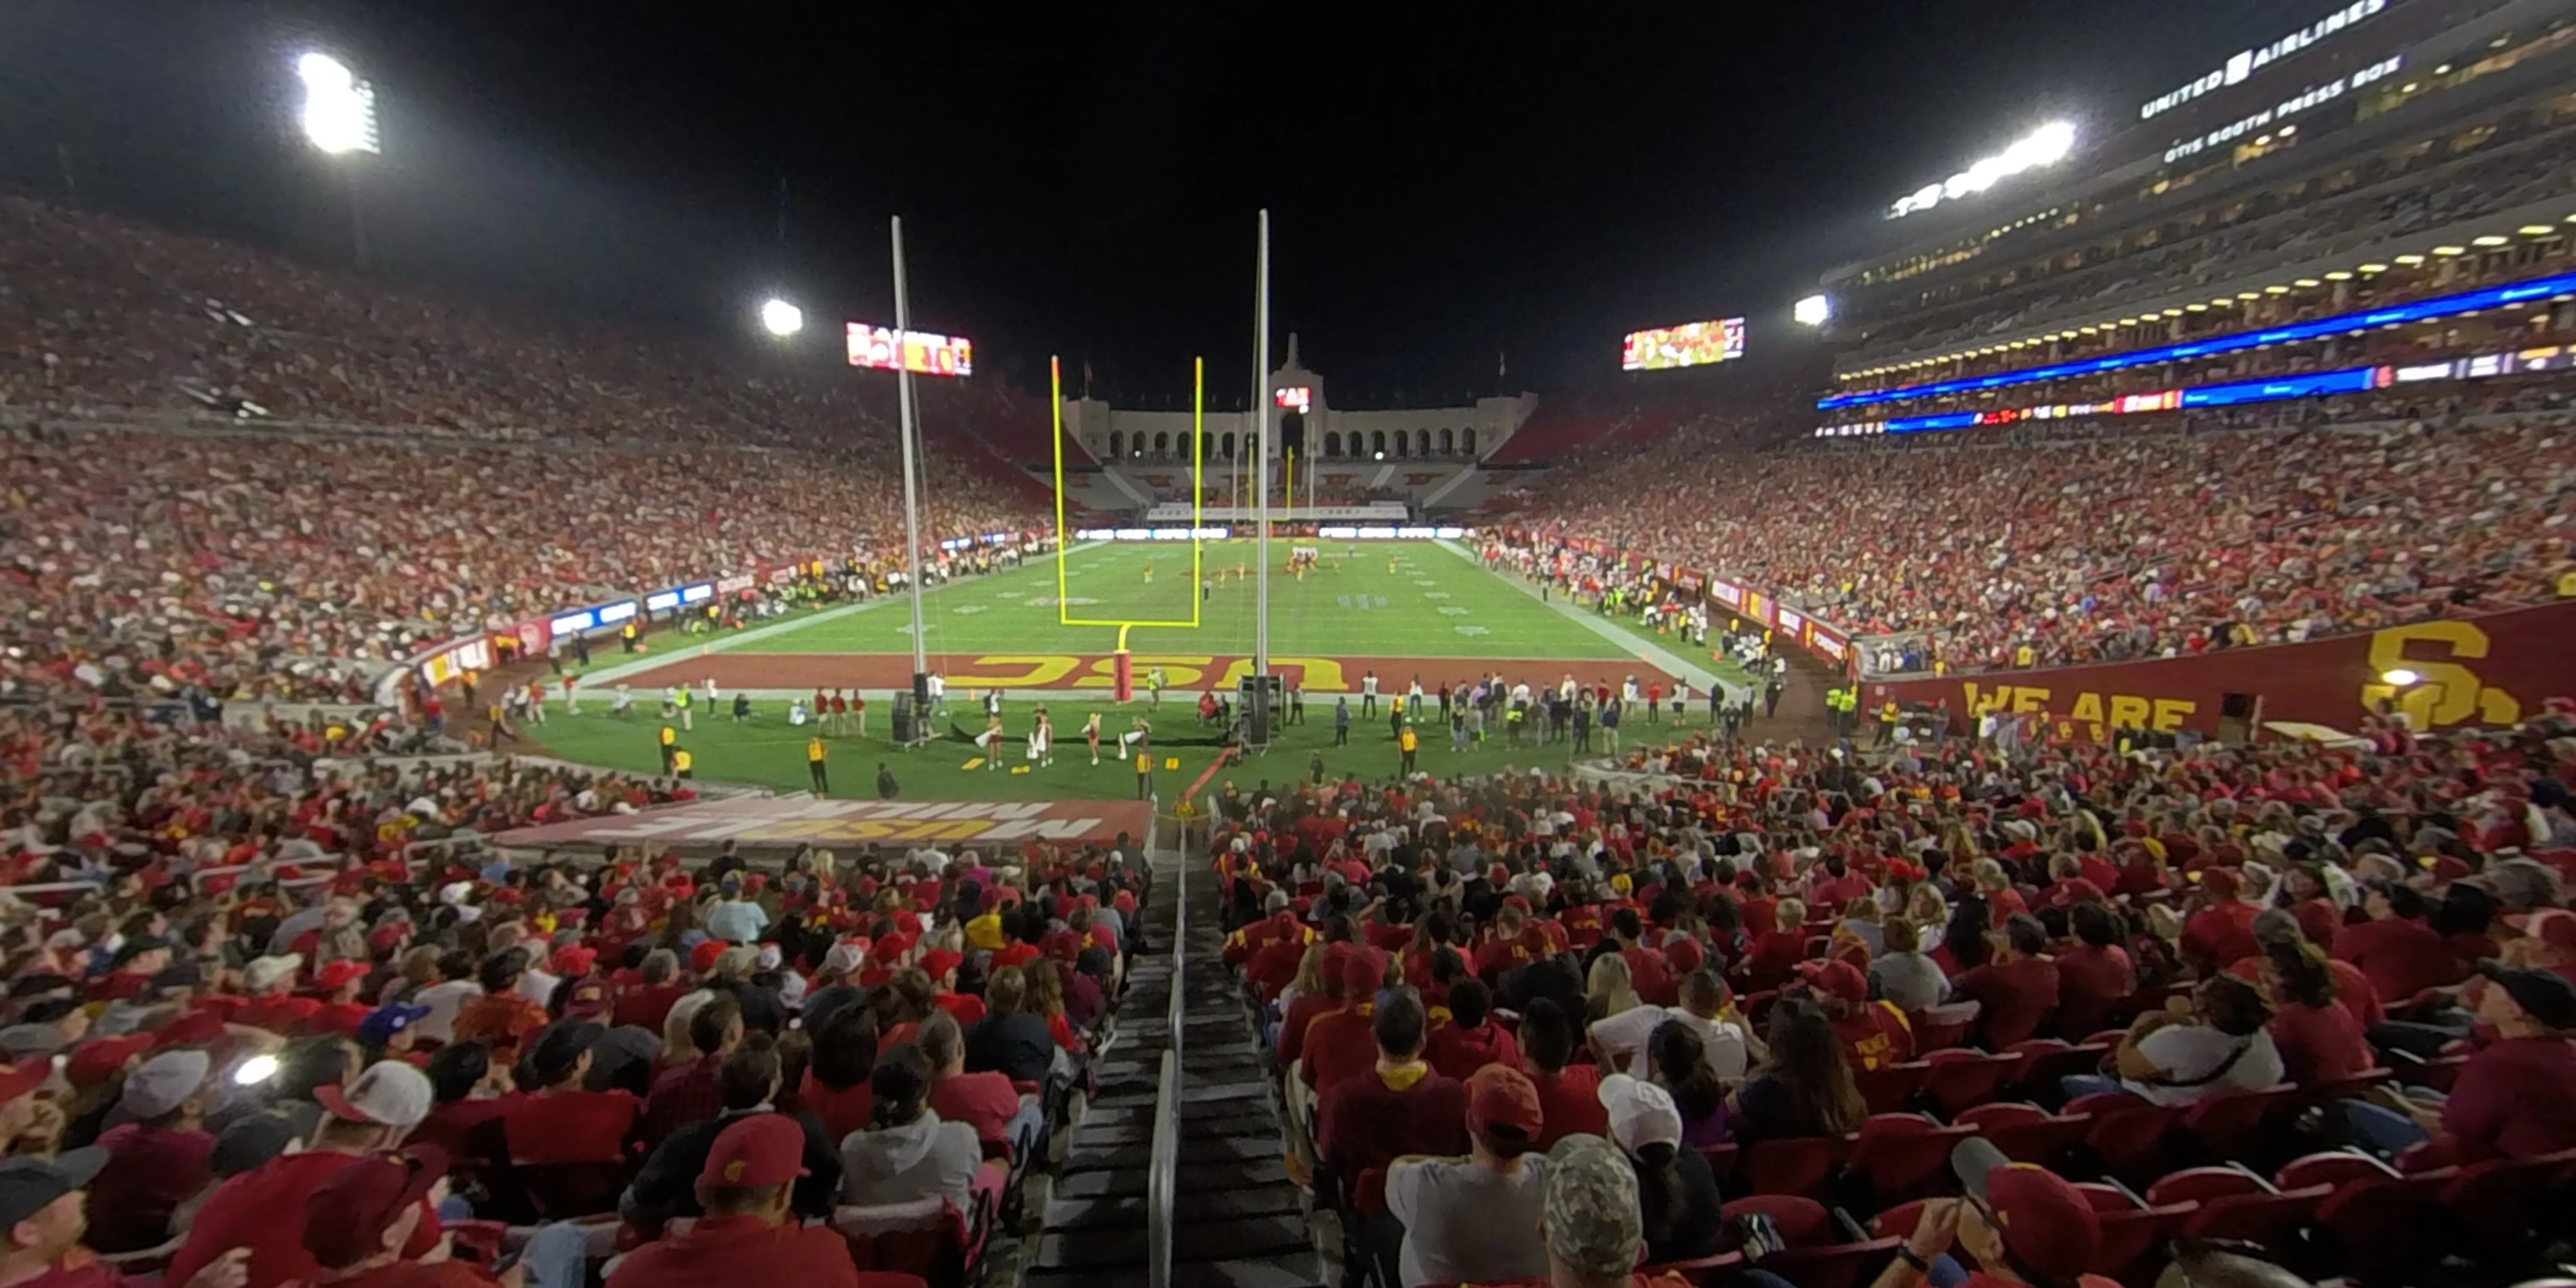 section 113 panoramic seat view  - los angeles memorial coliseum